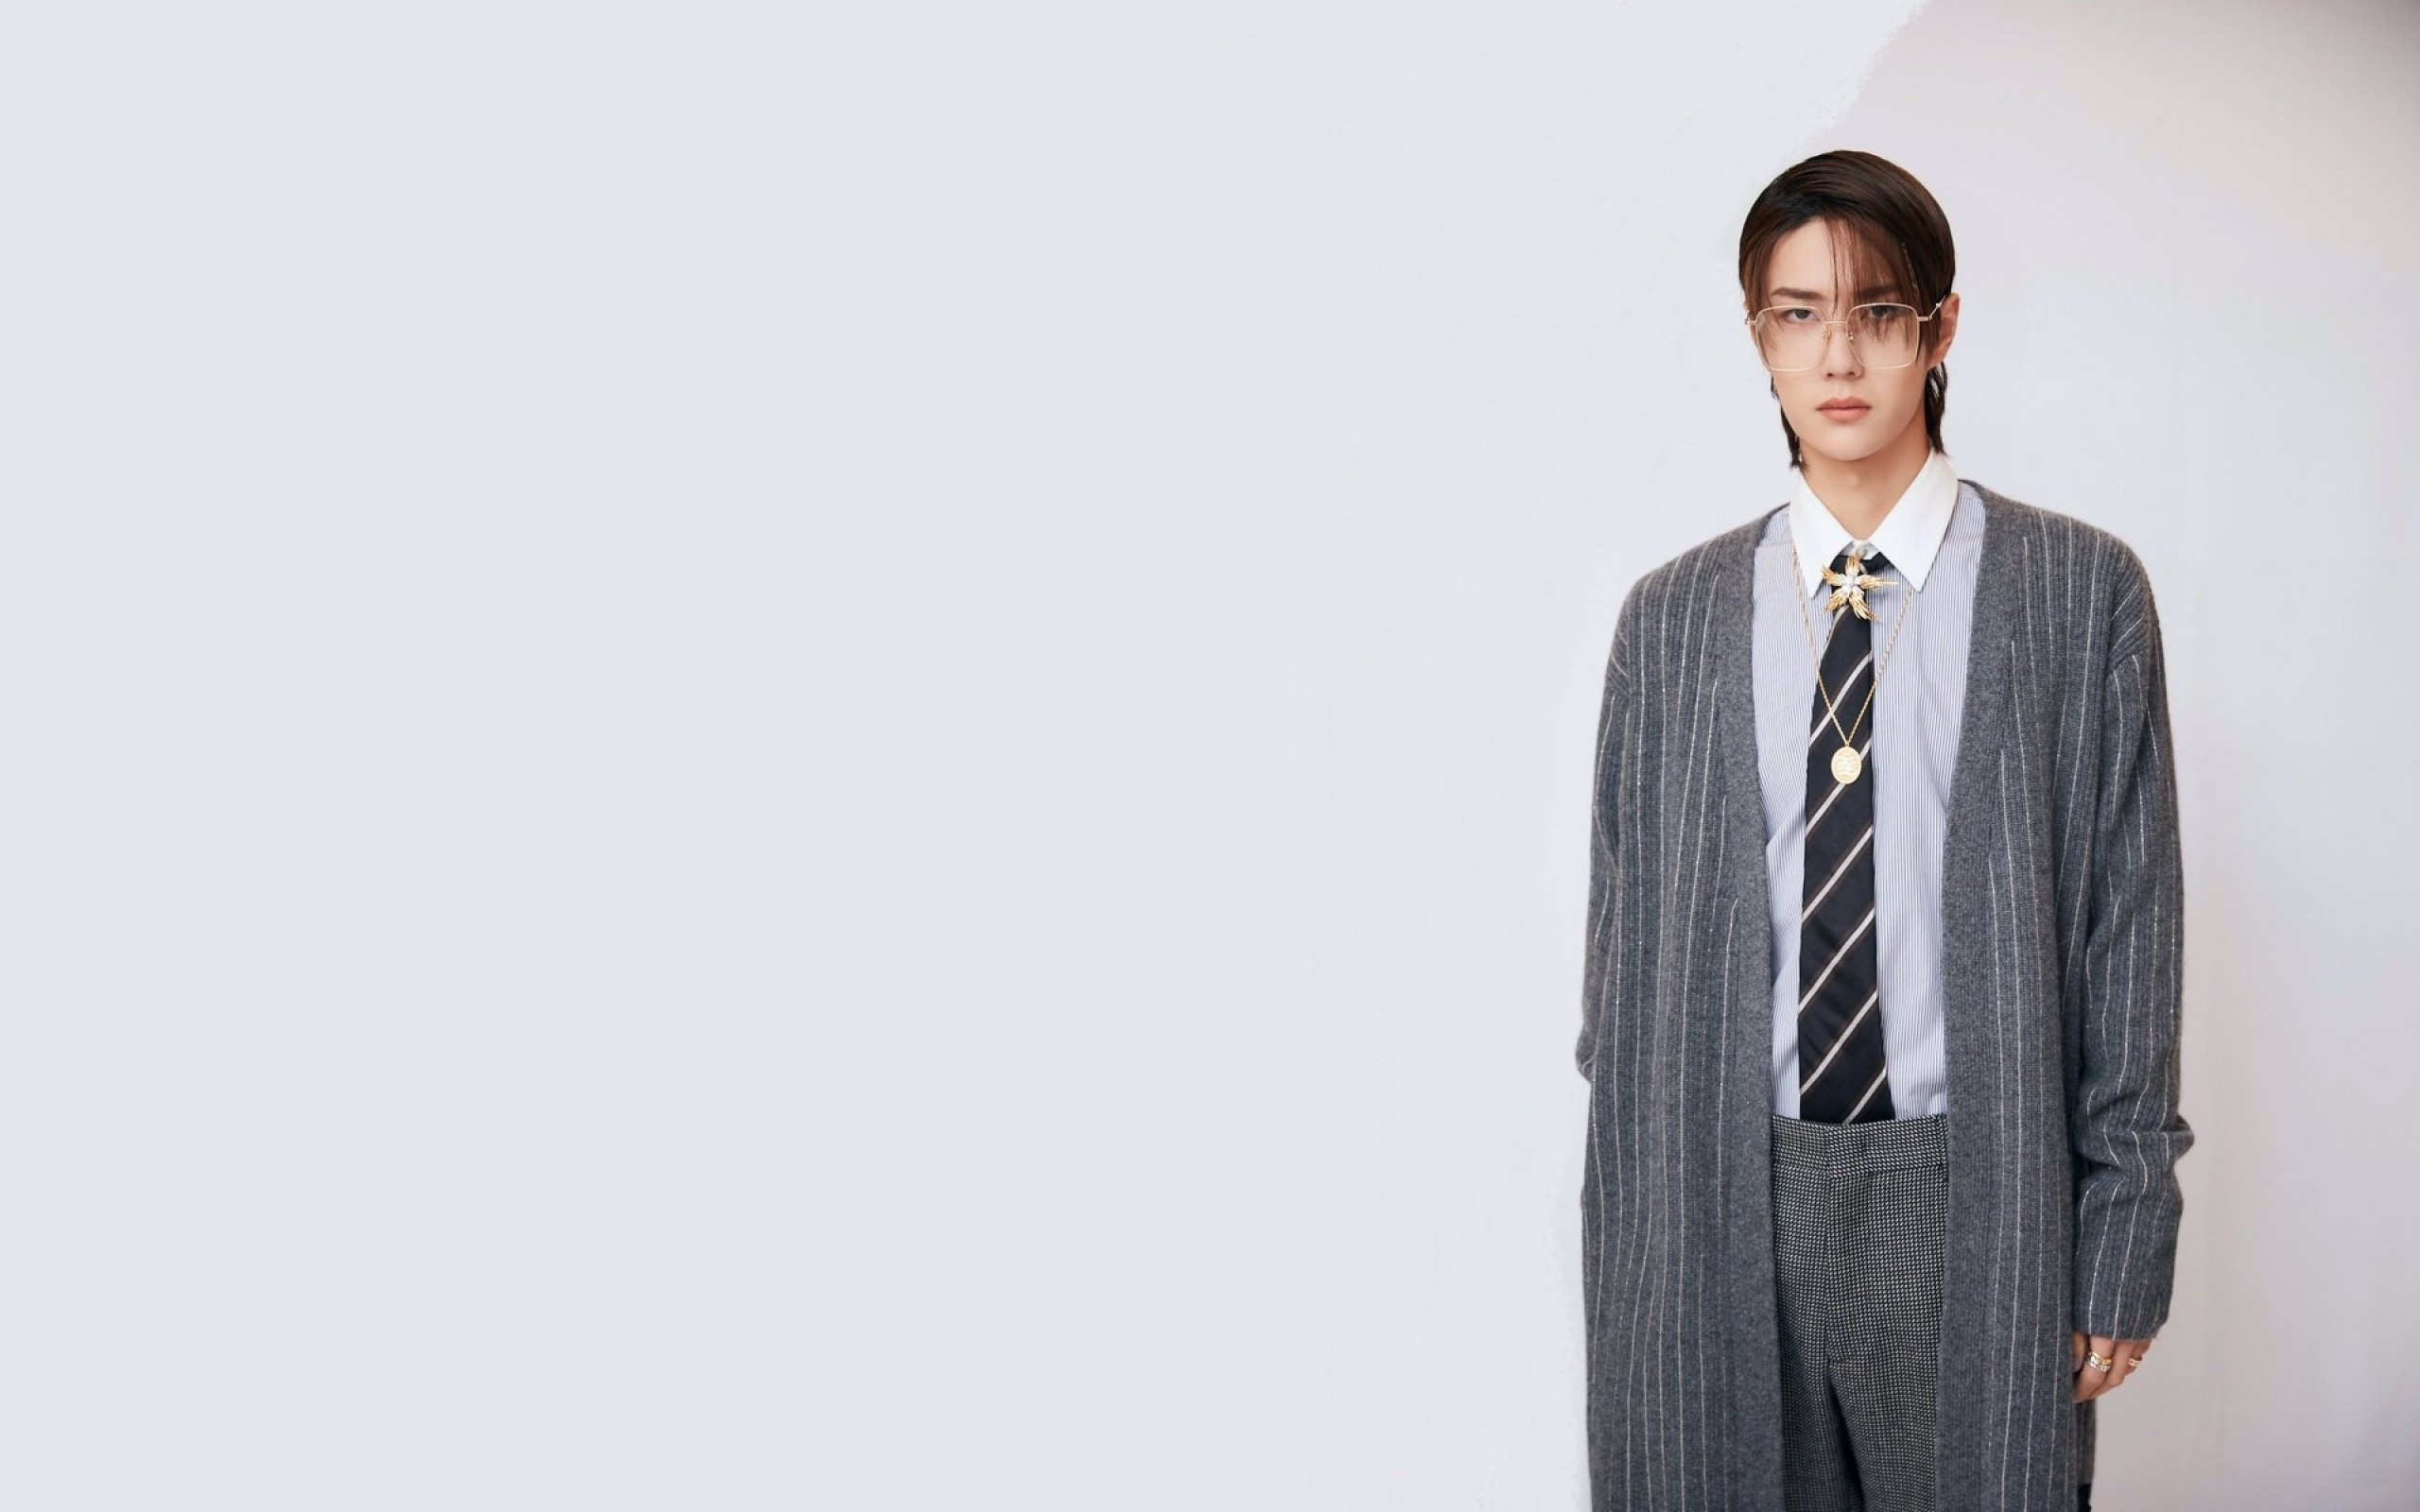 Download 2560x1600 Asian Man, Wang Yibo, Glasses, Necktie, Handsomechinese Actor Wallpaper for MacBook Pro 13 inch